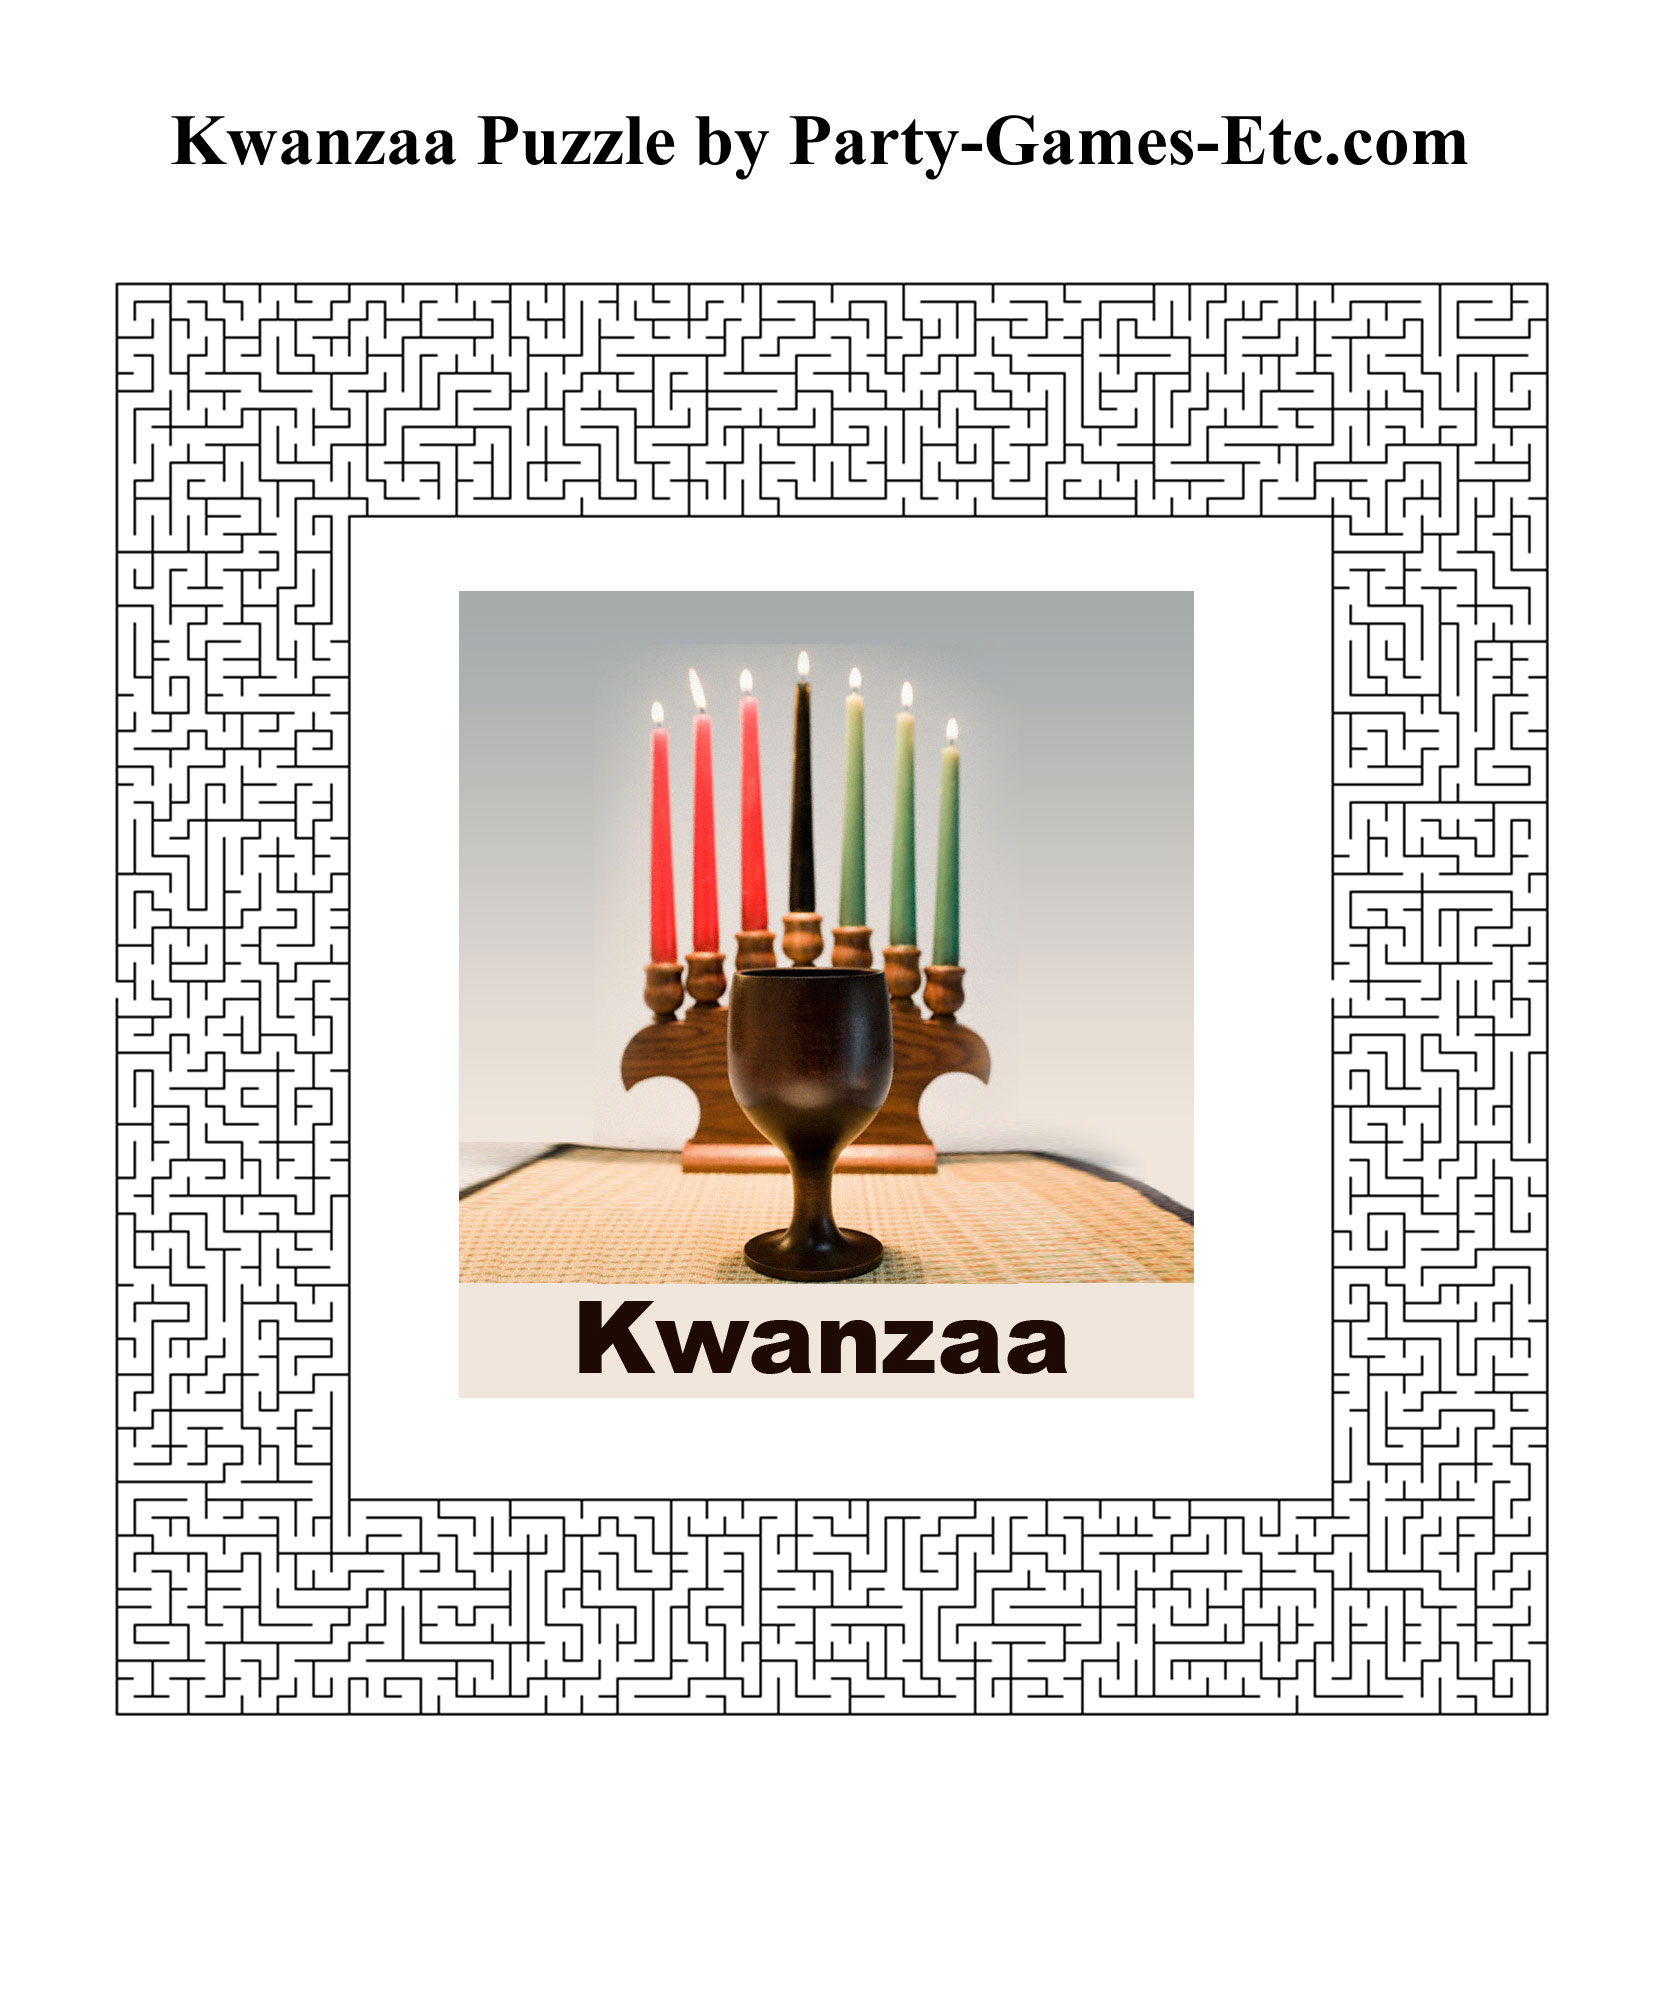 Kwanzaa Word Search Printable Free A variety of options are available